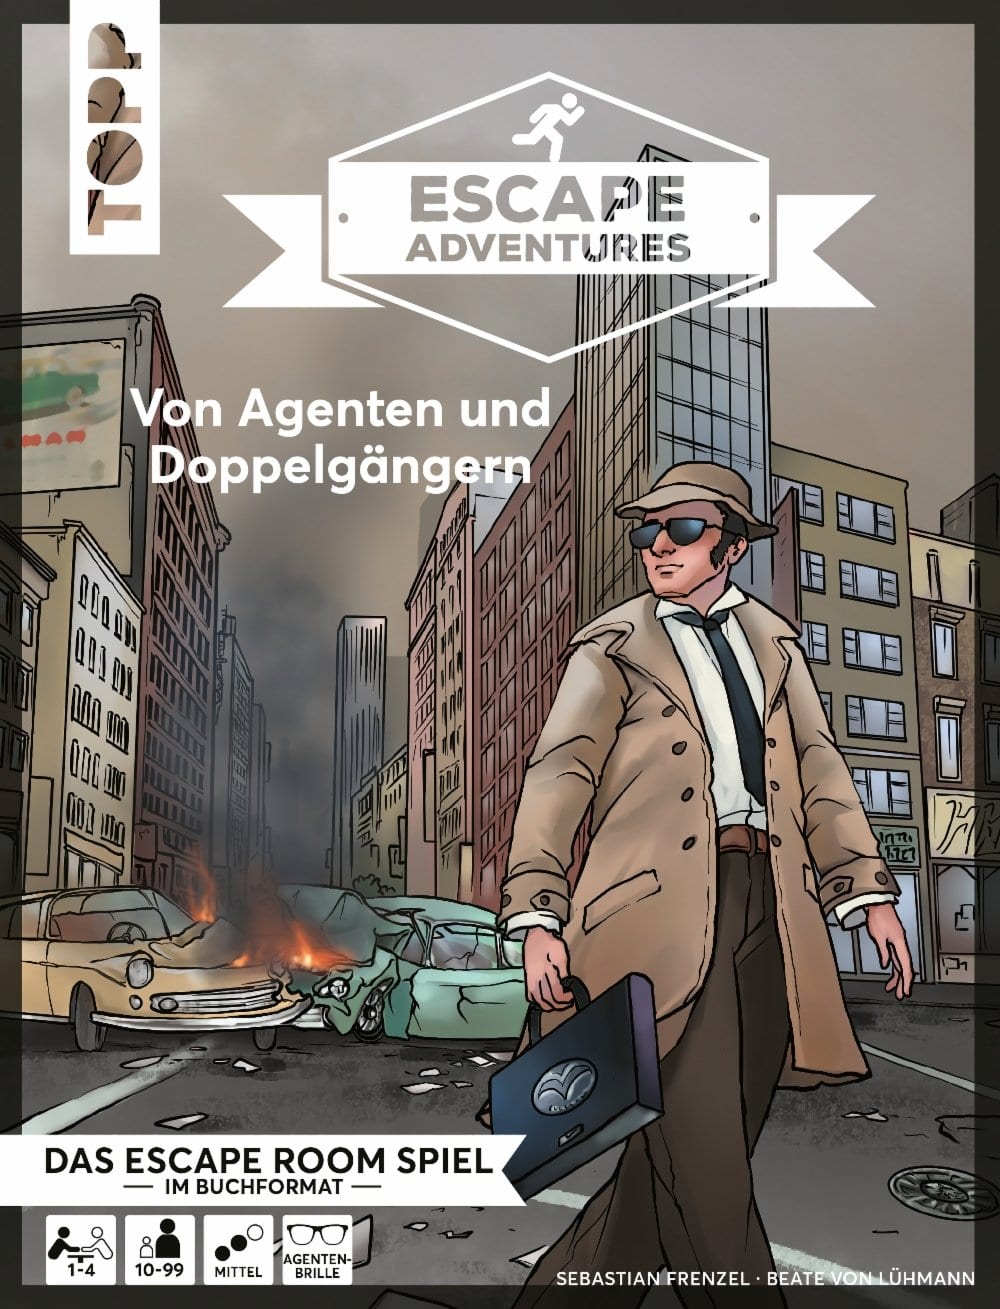 Escape Adventures - From Agents e Doubles Kosmos a Deinparadies.ch